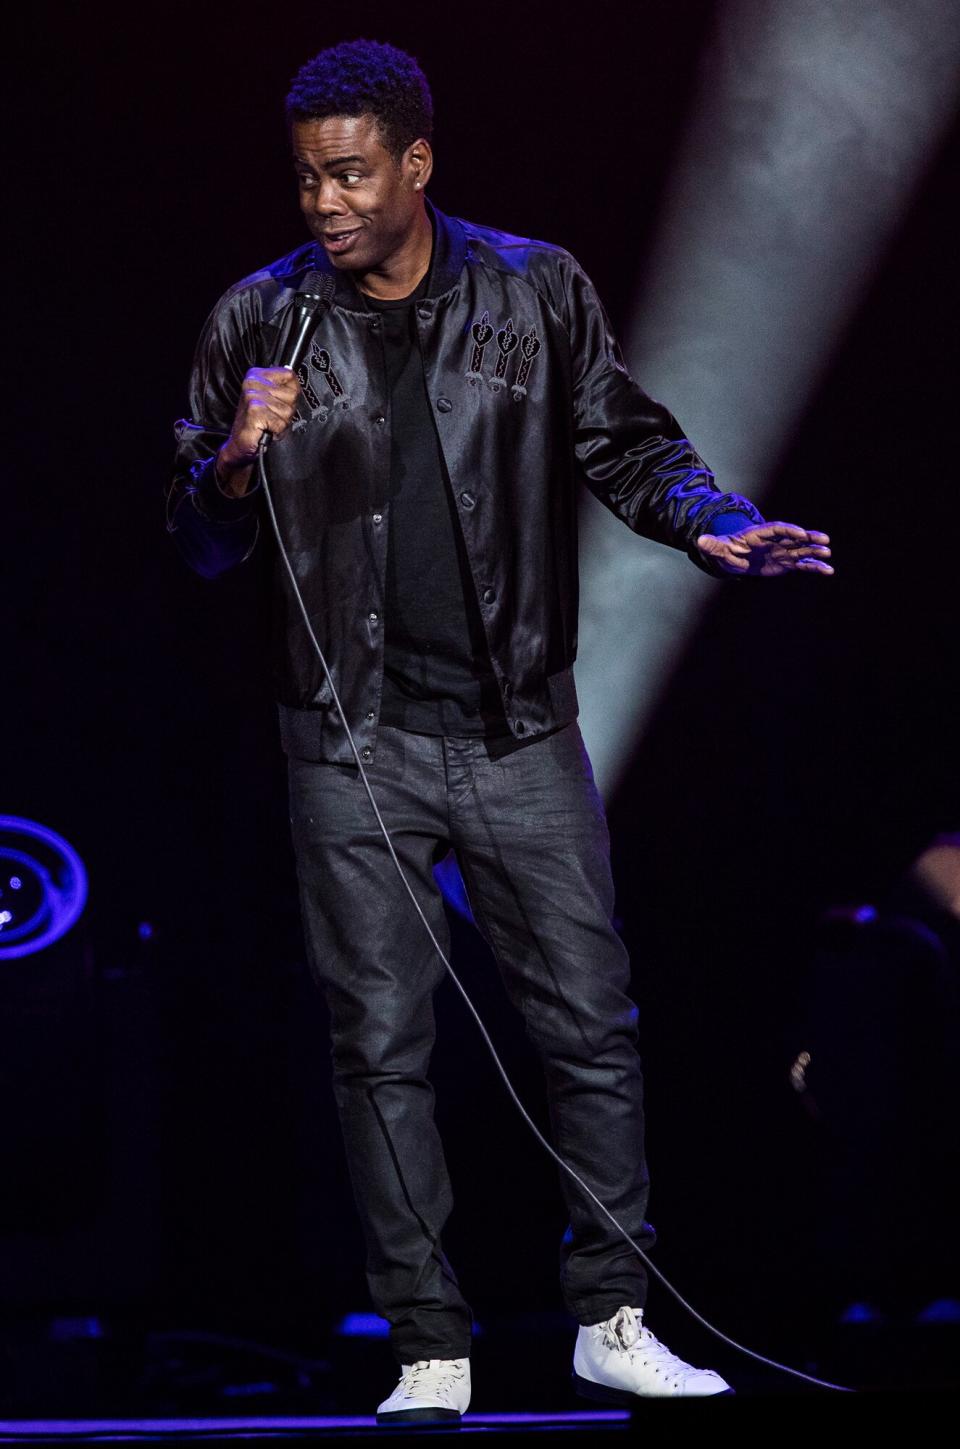 Chris Rock performs live during his Total Blackout Tour at the Ericsson Globe Arena on October 2, 2017 in Stockholm, Sweden